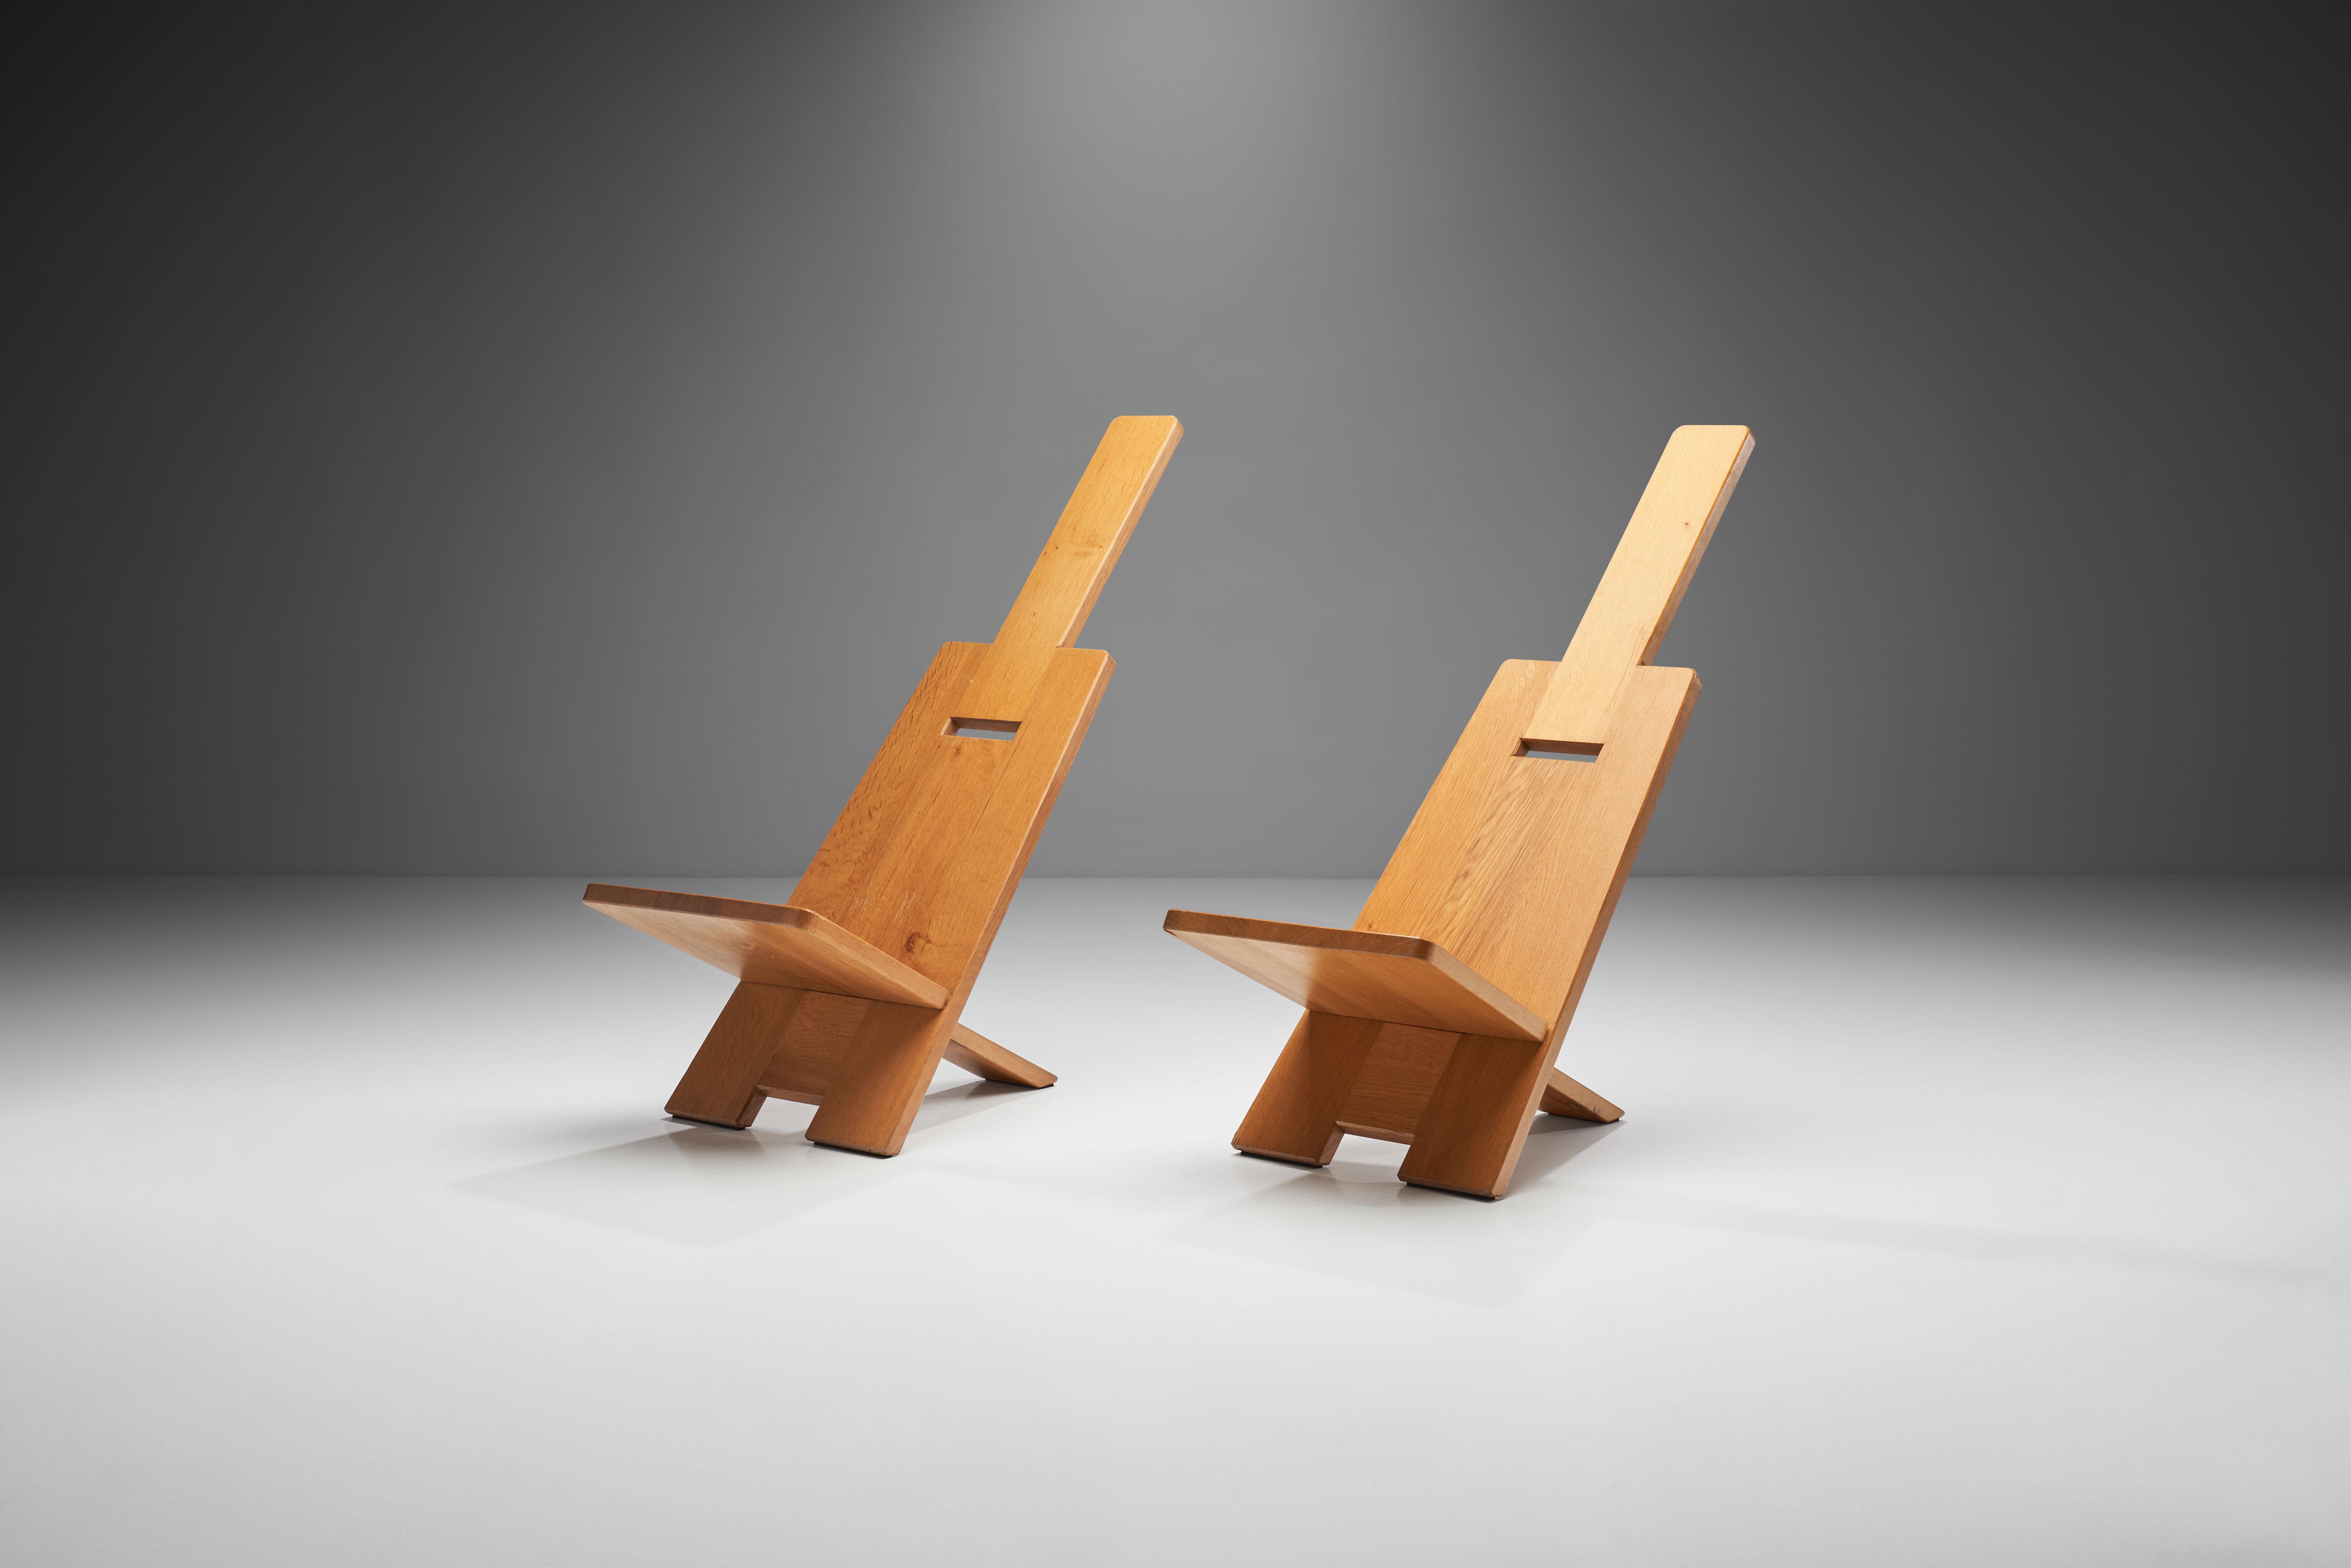 French Pair of Alain Gaubert “Africanist” Chairs, France, 1980s